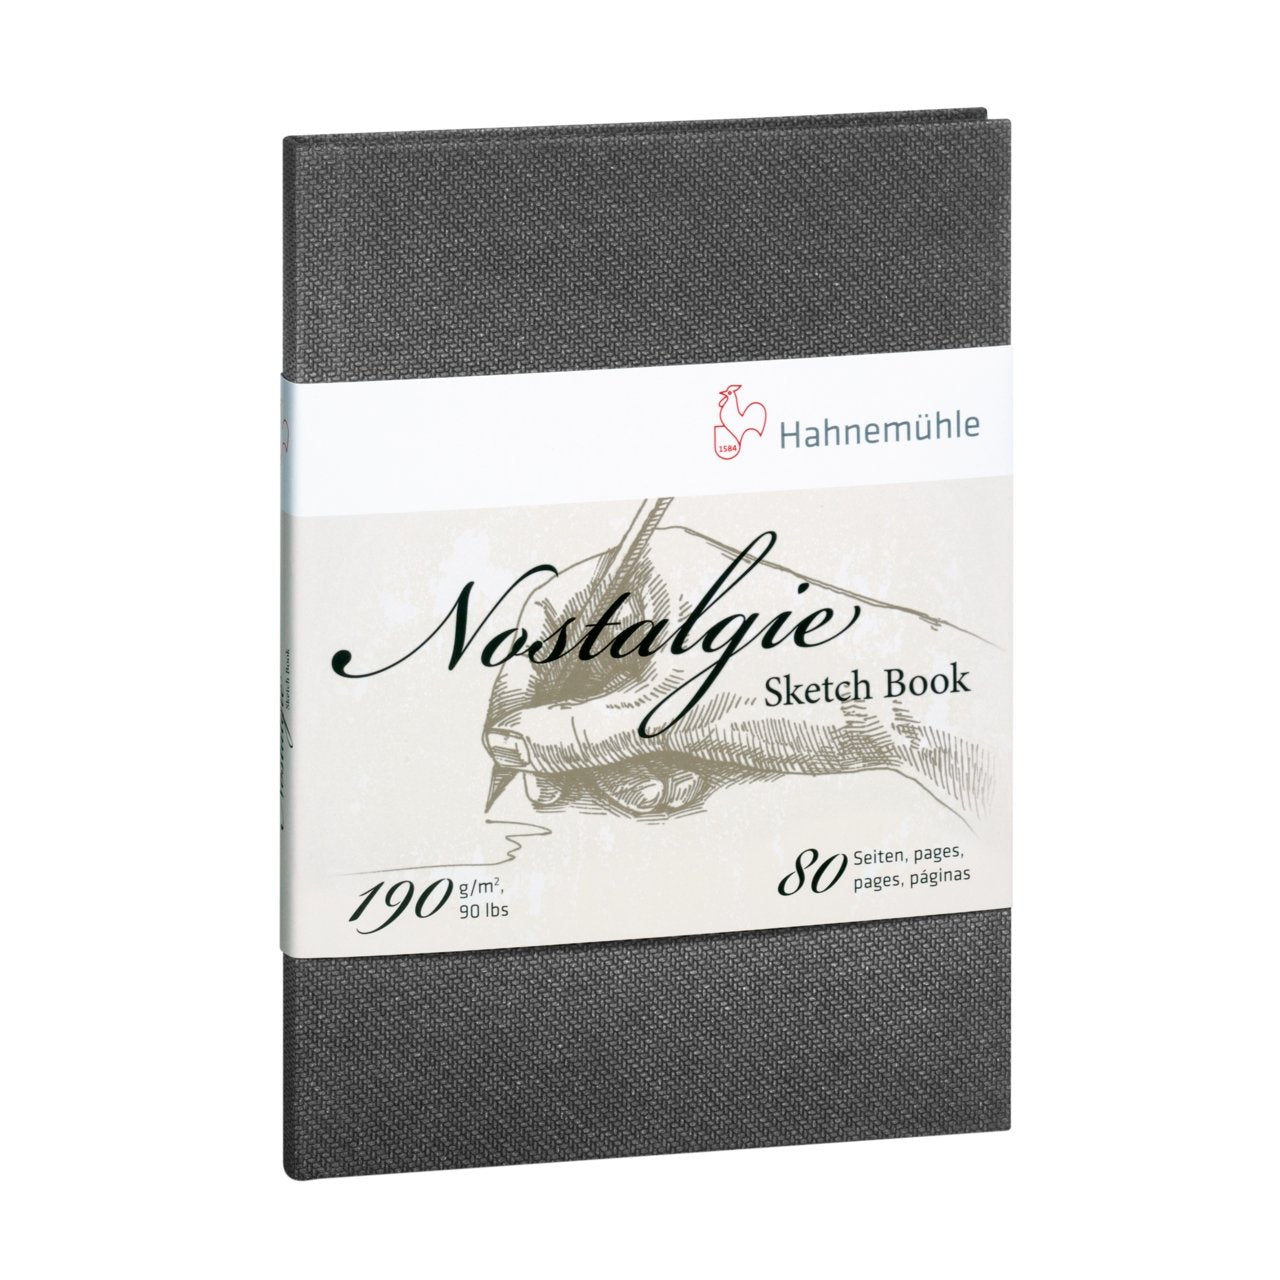 Hahnemuehle Nostalgie Hard Cover Sketch Book 5.8 inch x 4.1 inch (A6) Portrait - merriartist.com